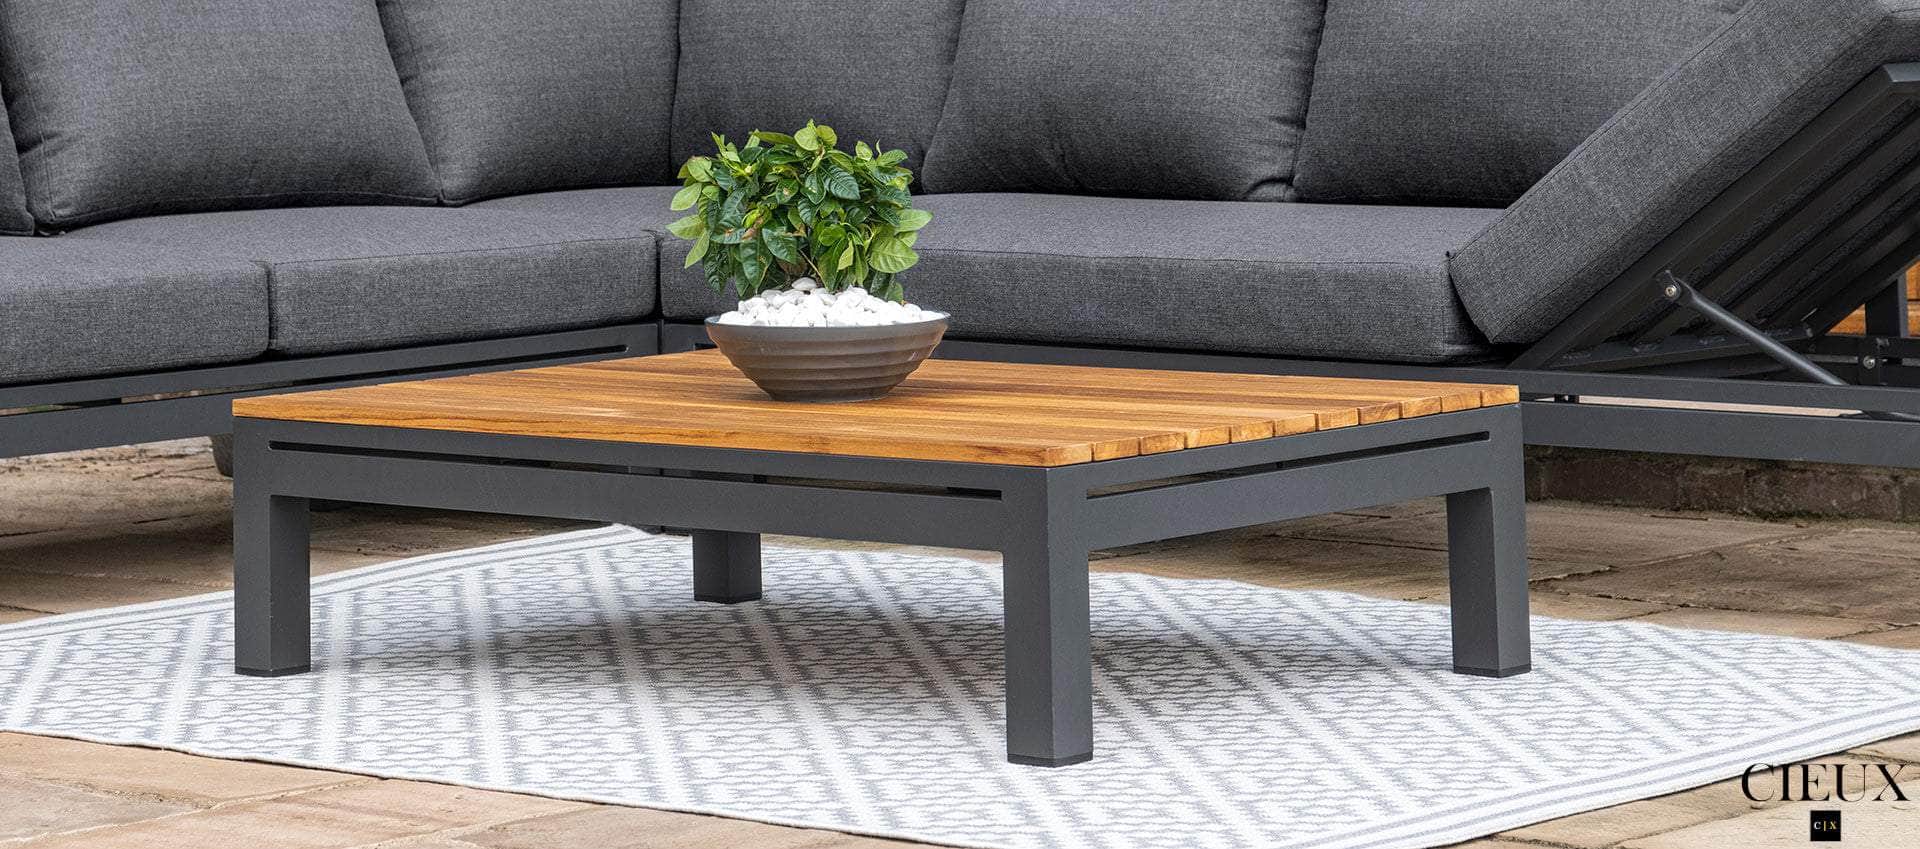 Pending - Cieux Sectional Bordeaux Outdoor Patio Aluminum Metal Coffee Table with Acacia Wooden Top in Grey and Natural